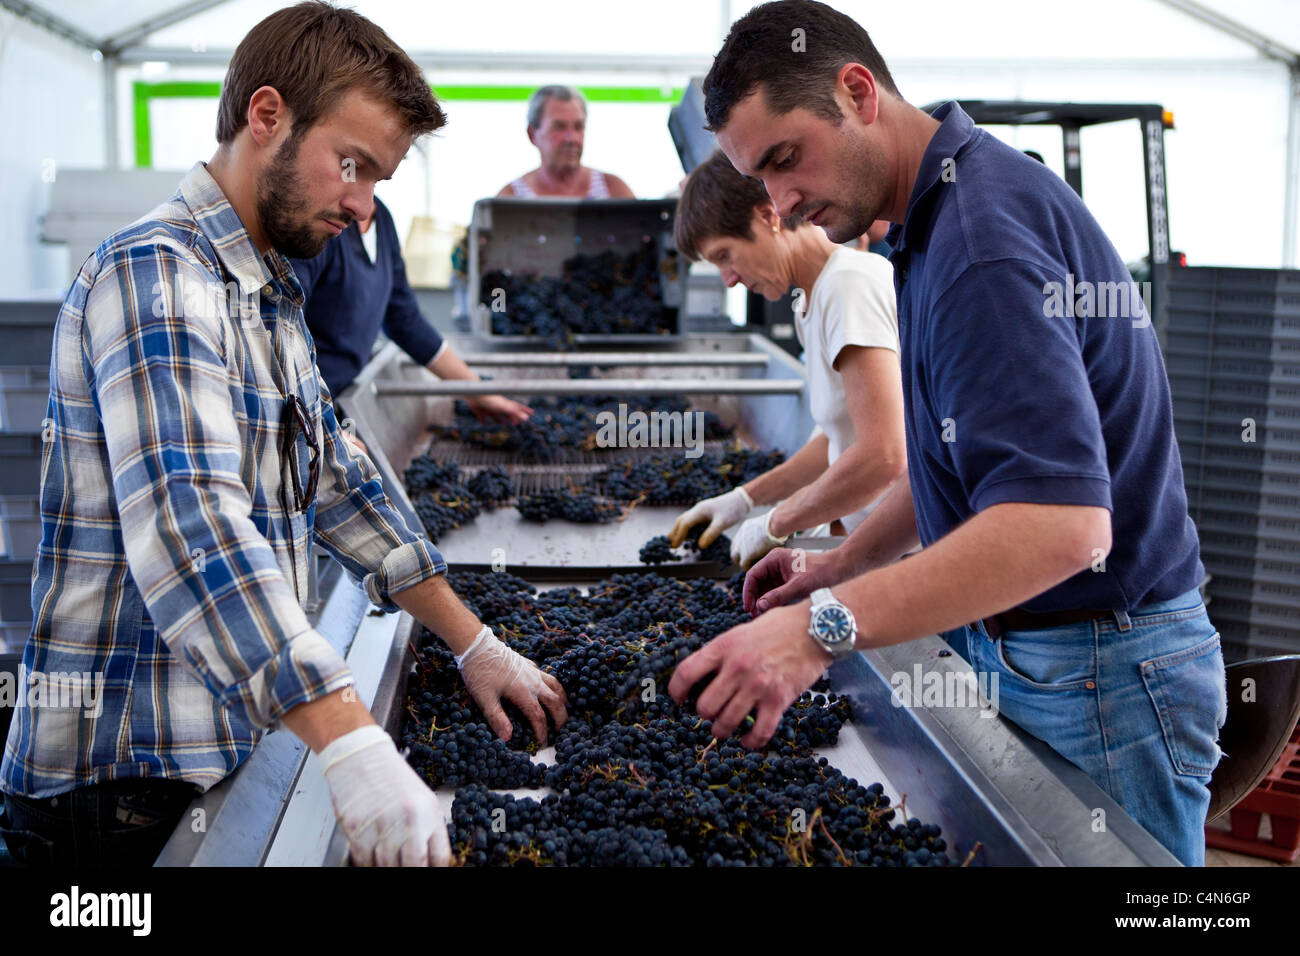 Olivier Berrouet, Oenologist, helps sort grapes by hand at famous Chateau Petrus wine estate at Pomerol in Bordeaux, France Stock Photo